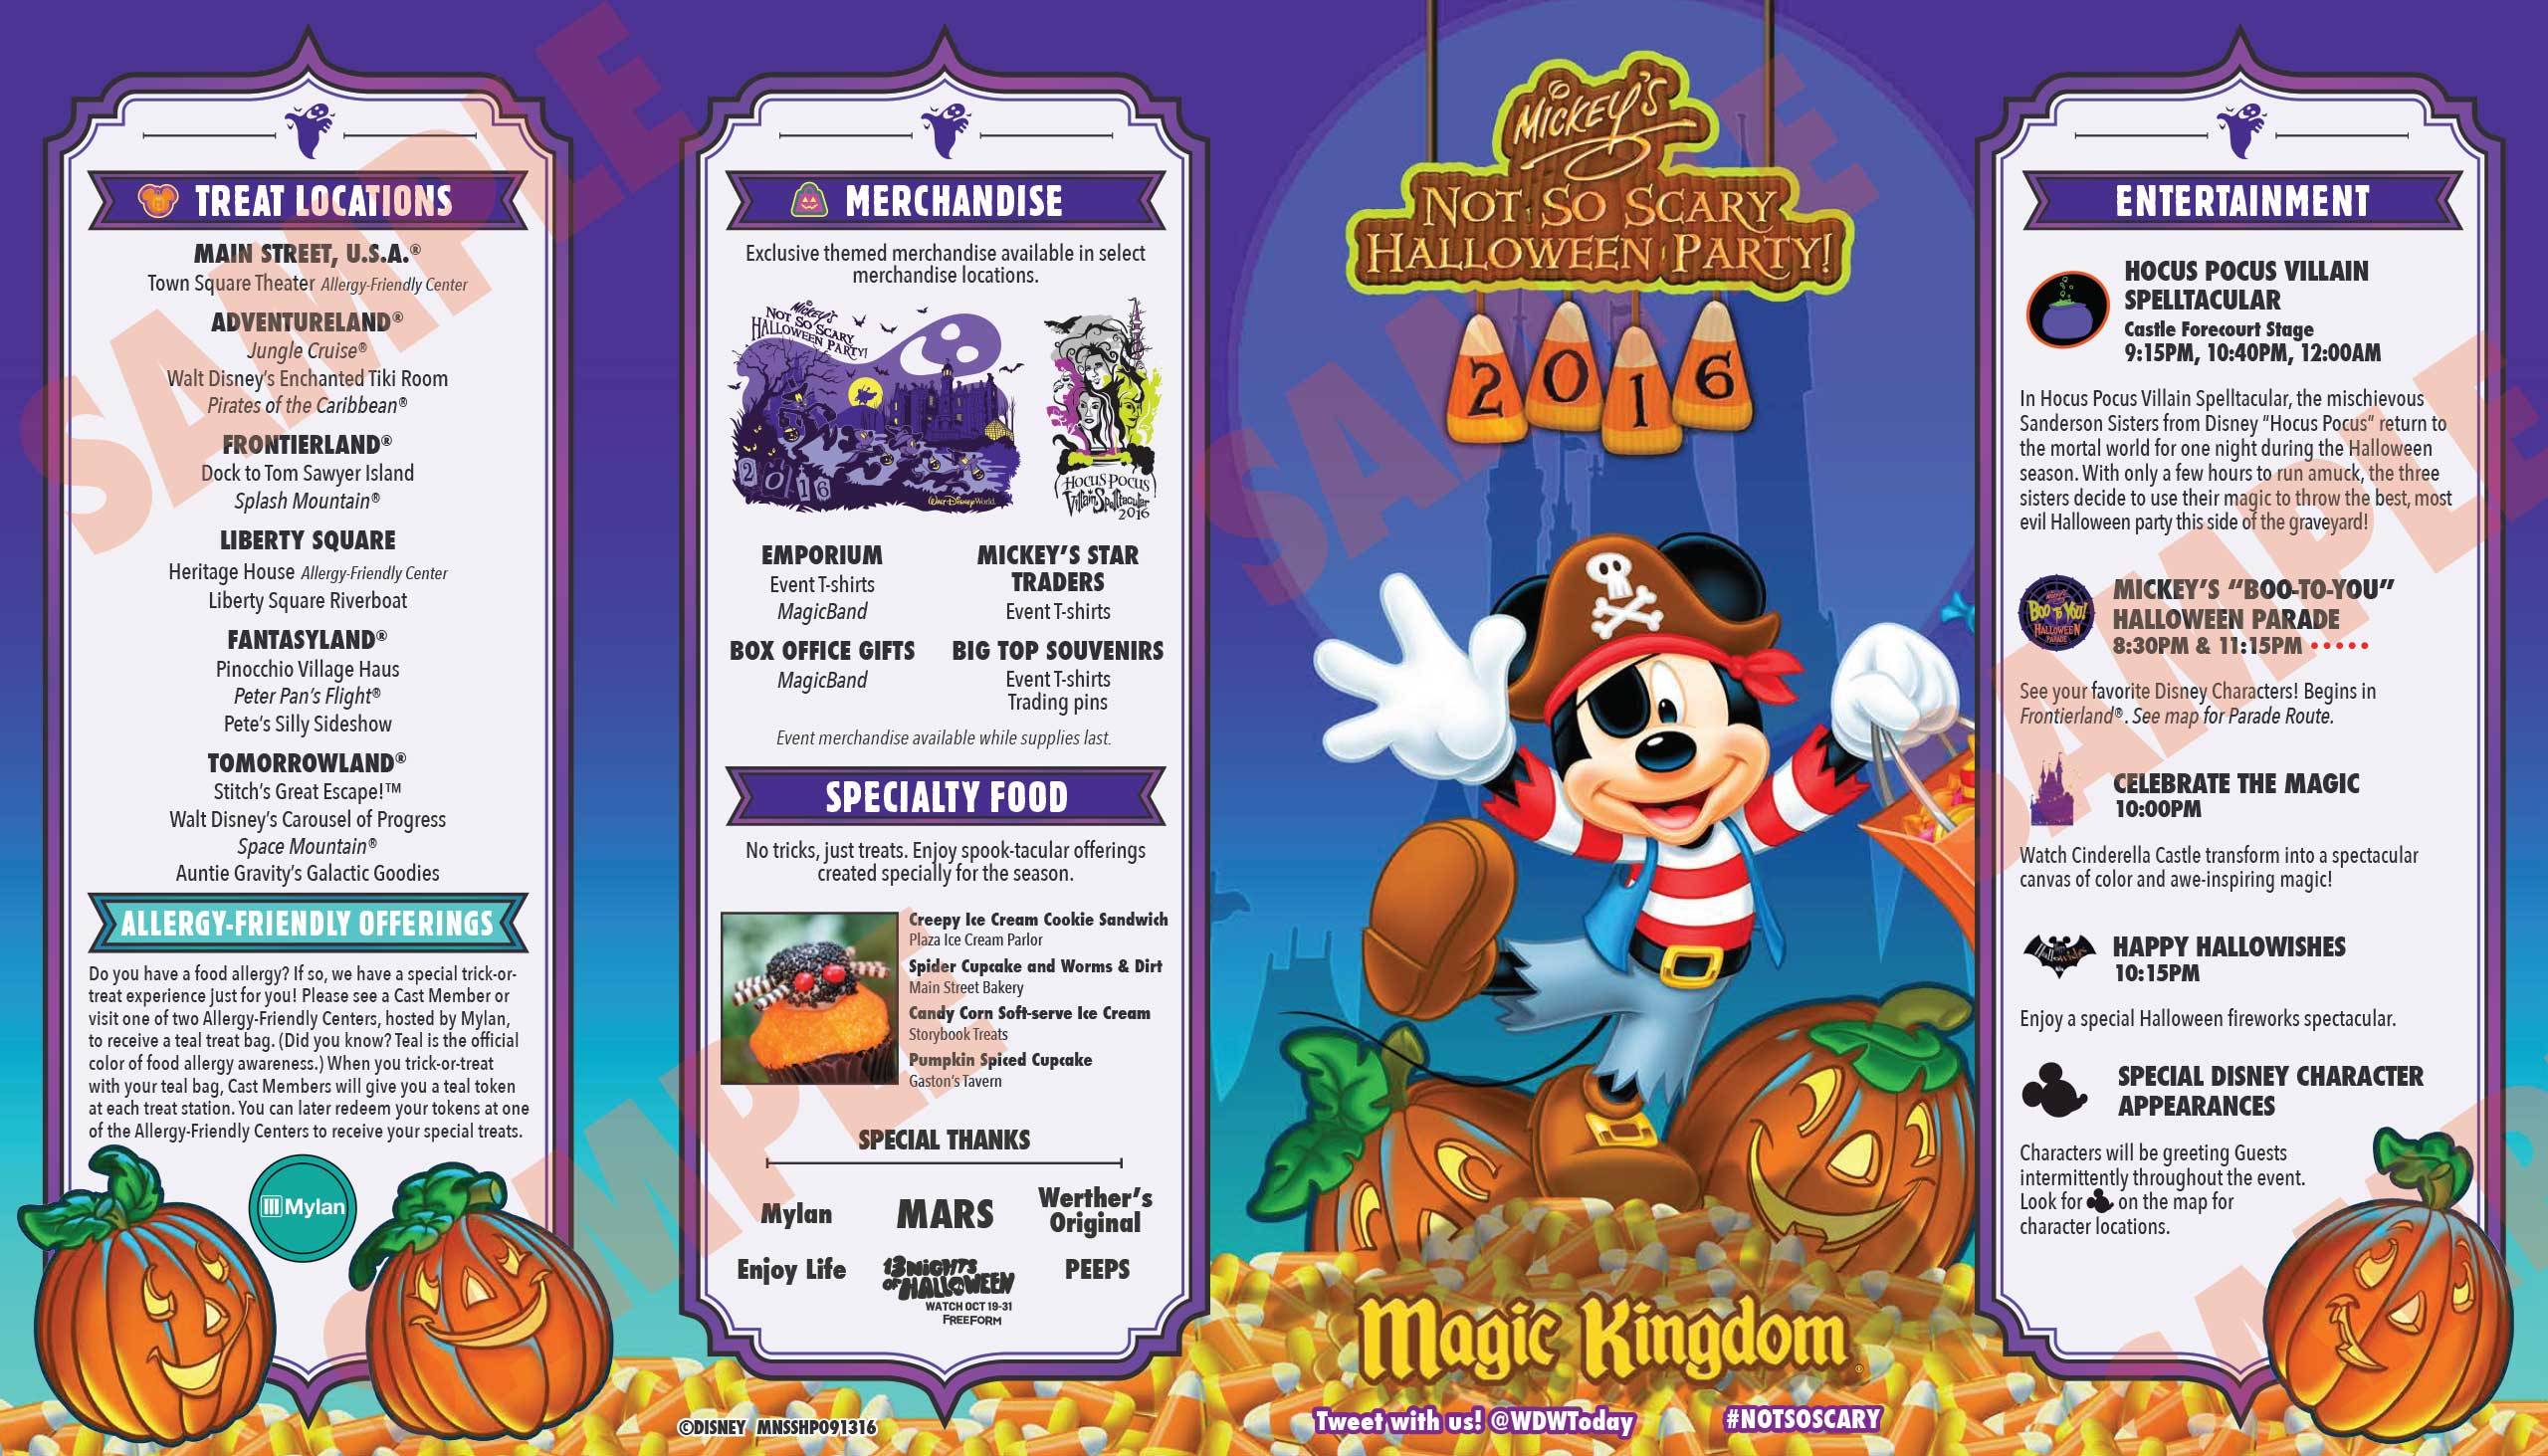 All the details and schedules for the 2016 Mickey's Not-So-Scary Halloween Party nights at the Magic Kingdom